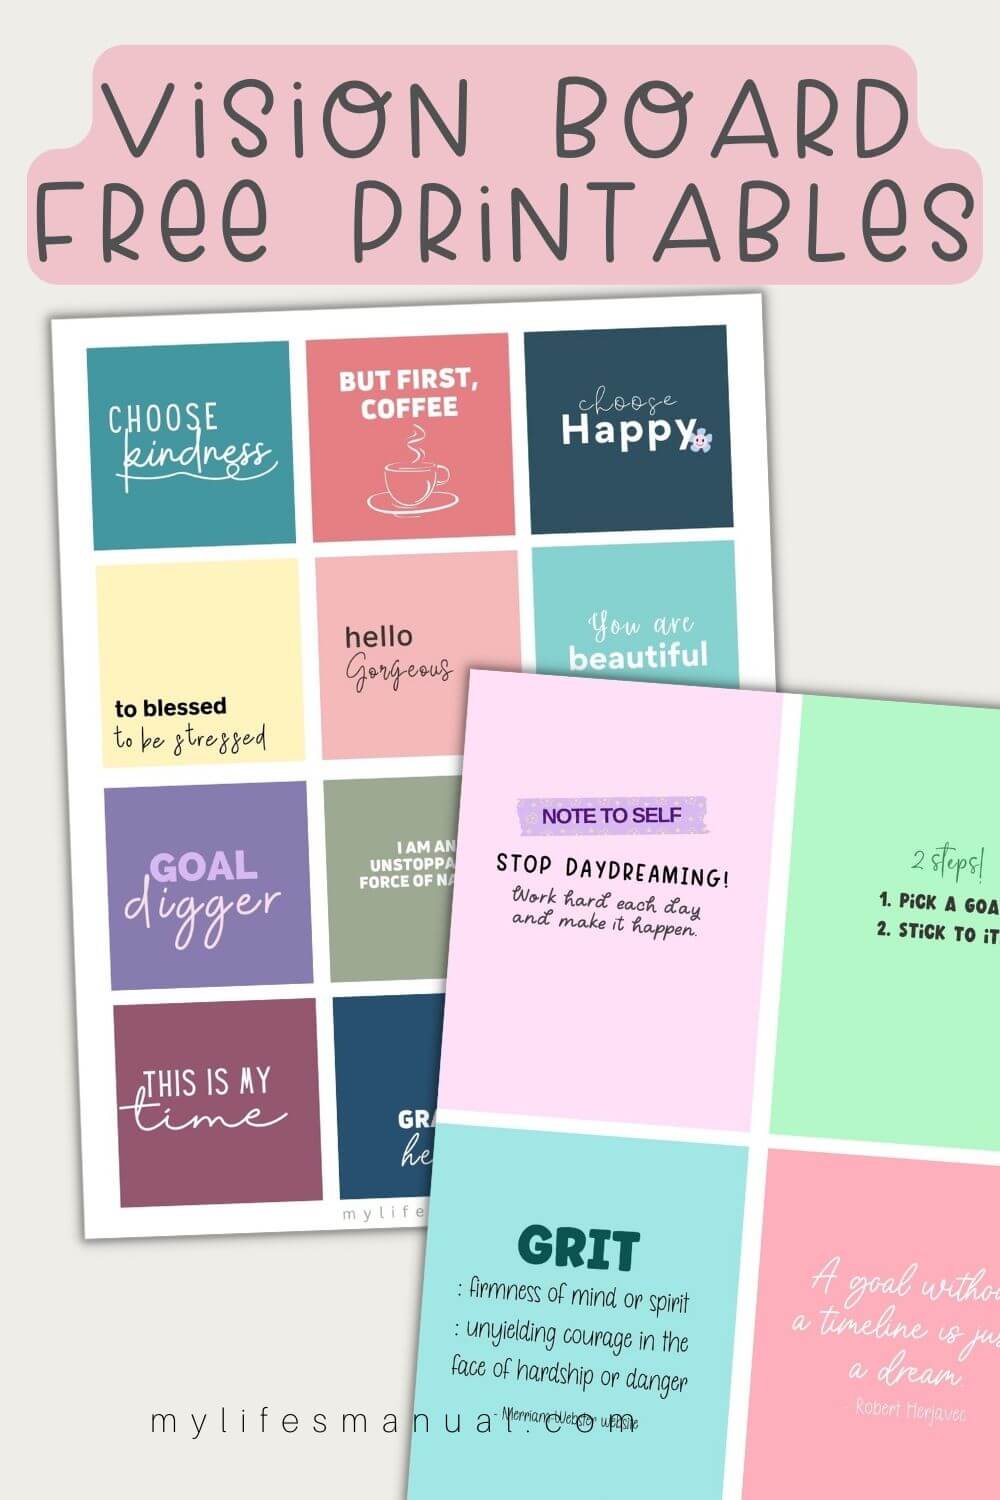 Vision Board Ideas. Affirmation Quotes Free Printables - Mylifesmanual